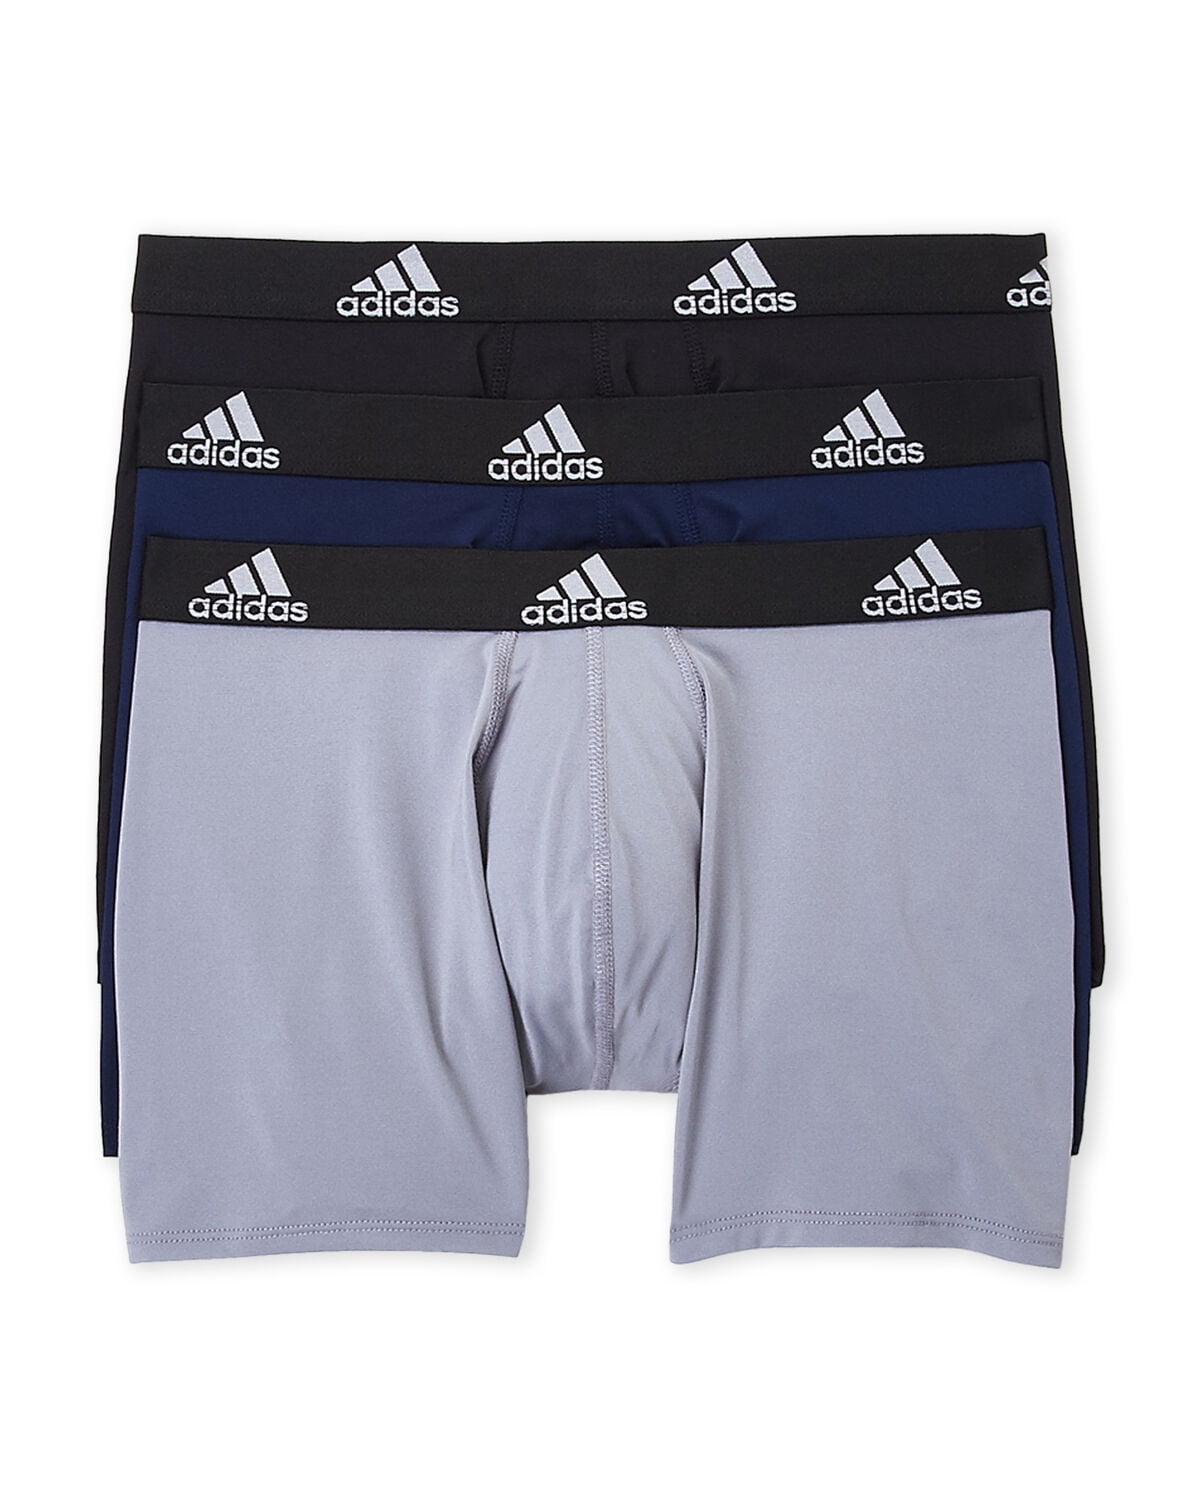 adidas men's climacool 7 midway briefs kit